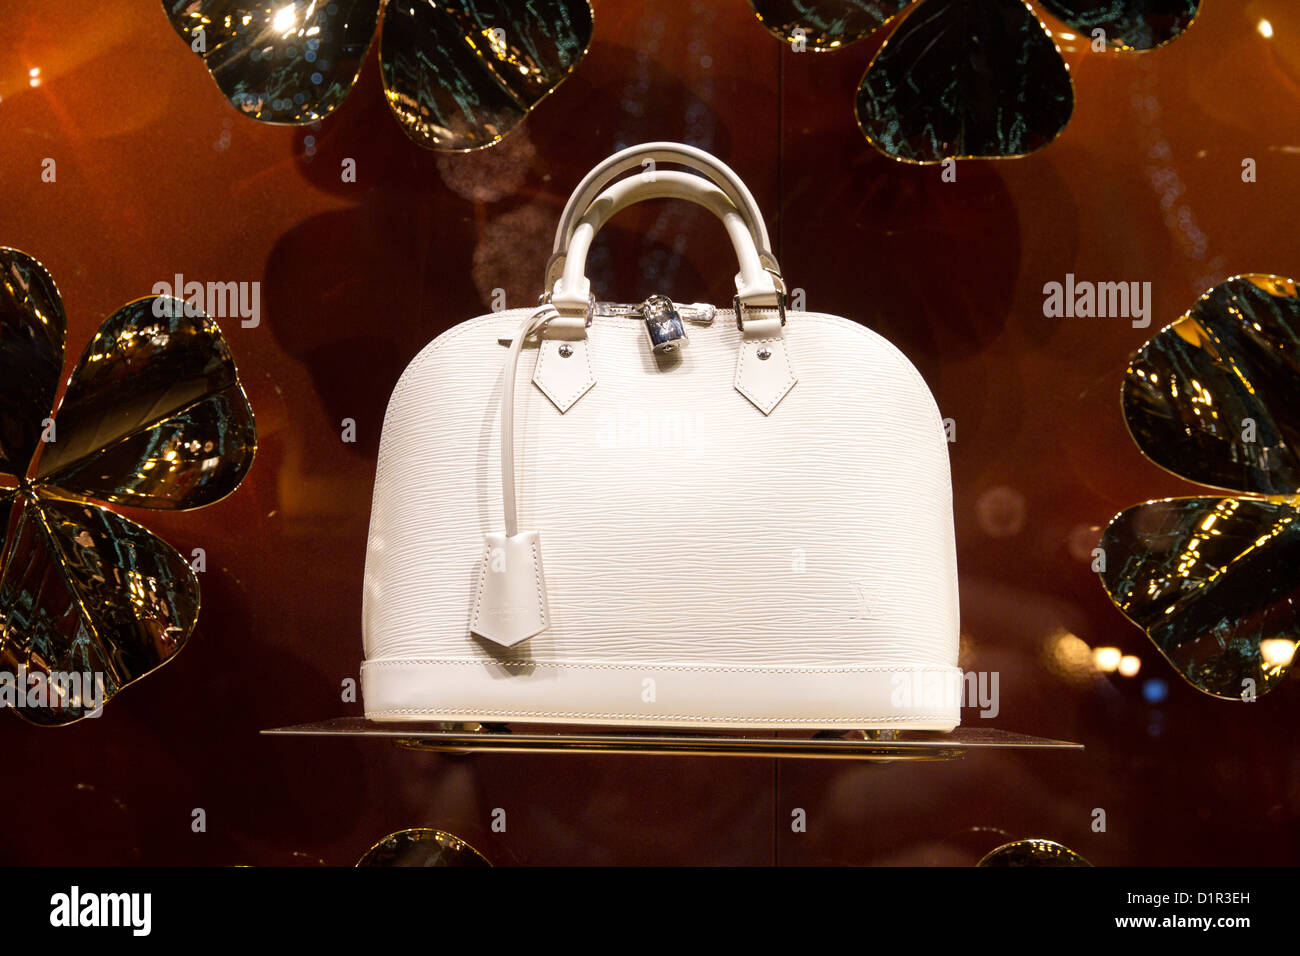 A Louis Vuitton handbag displayed in the Macy's Herald Square